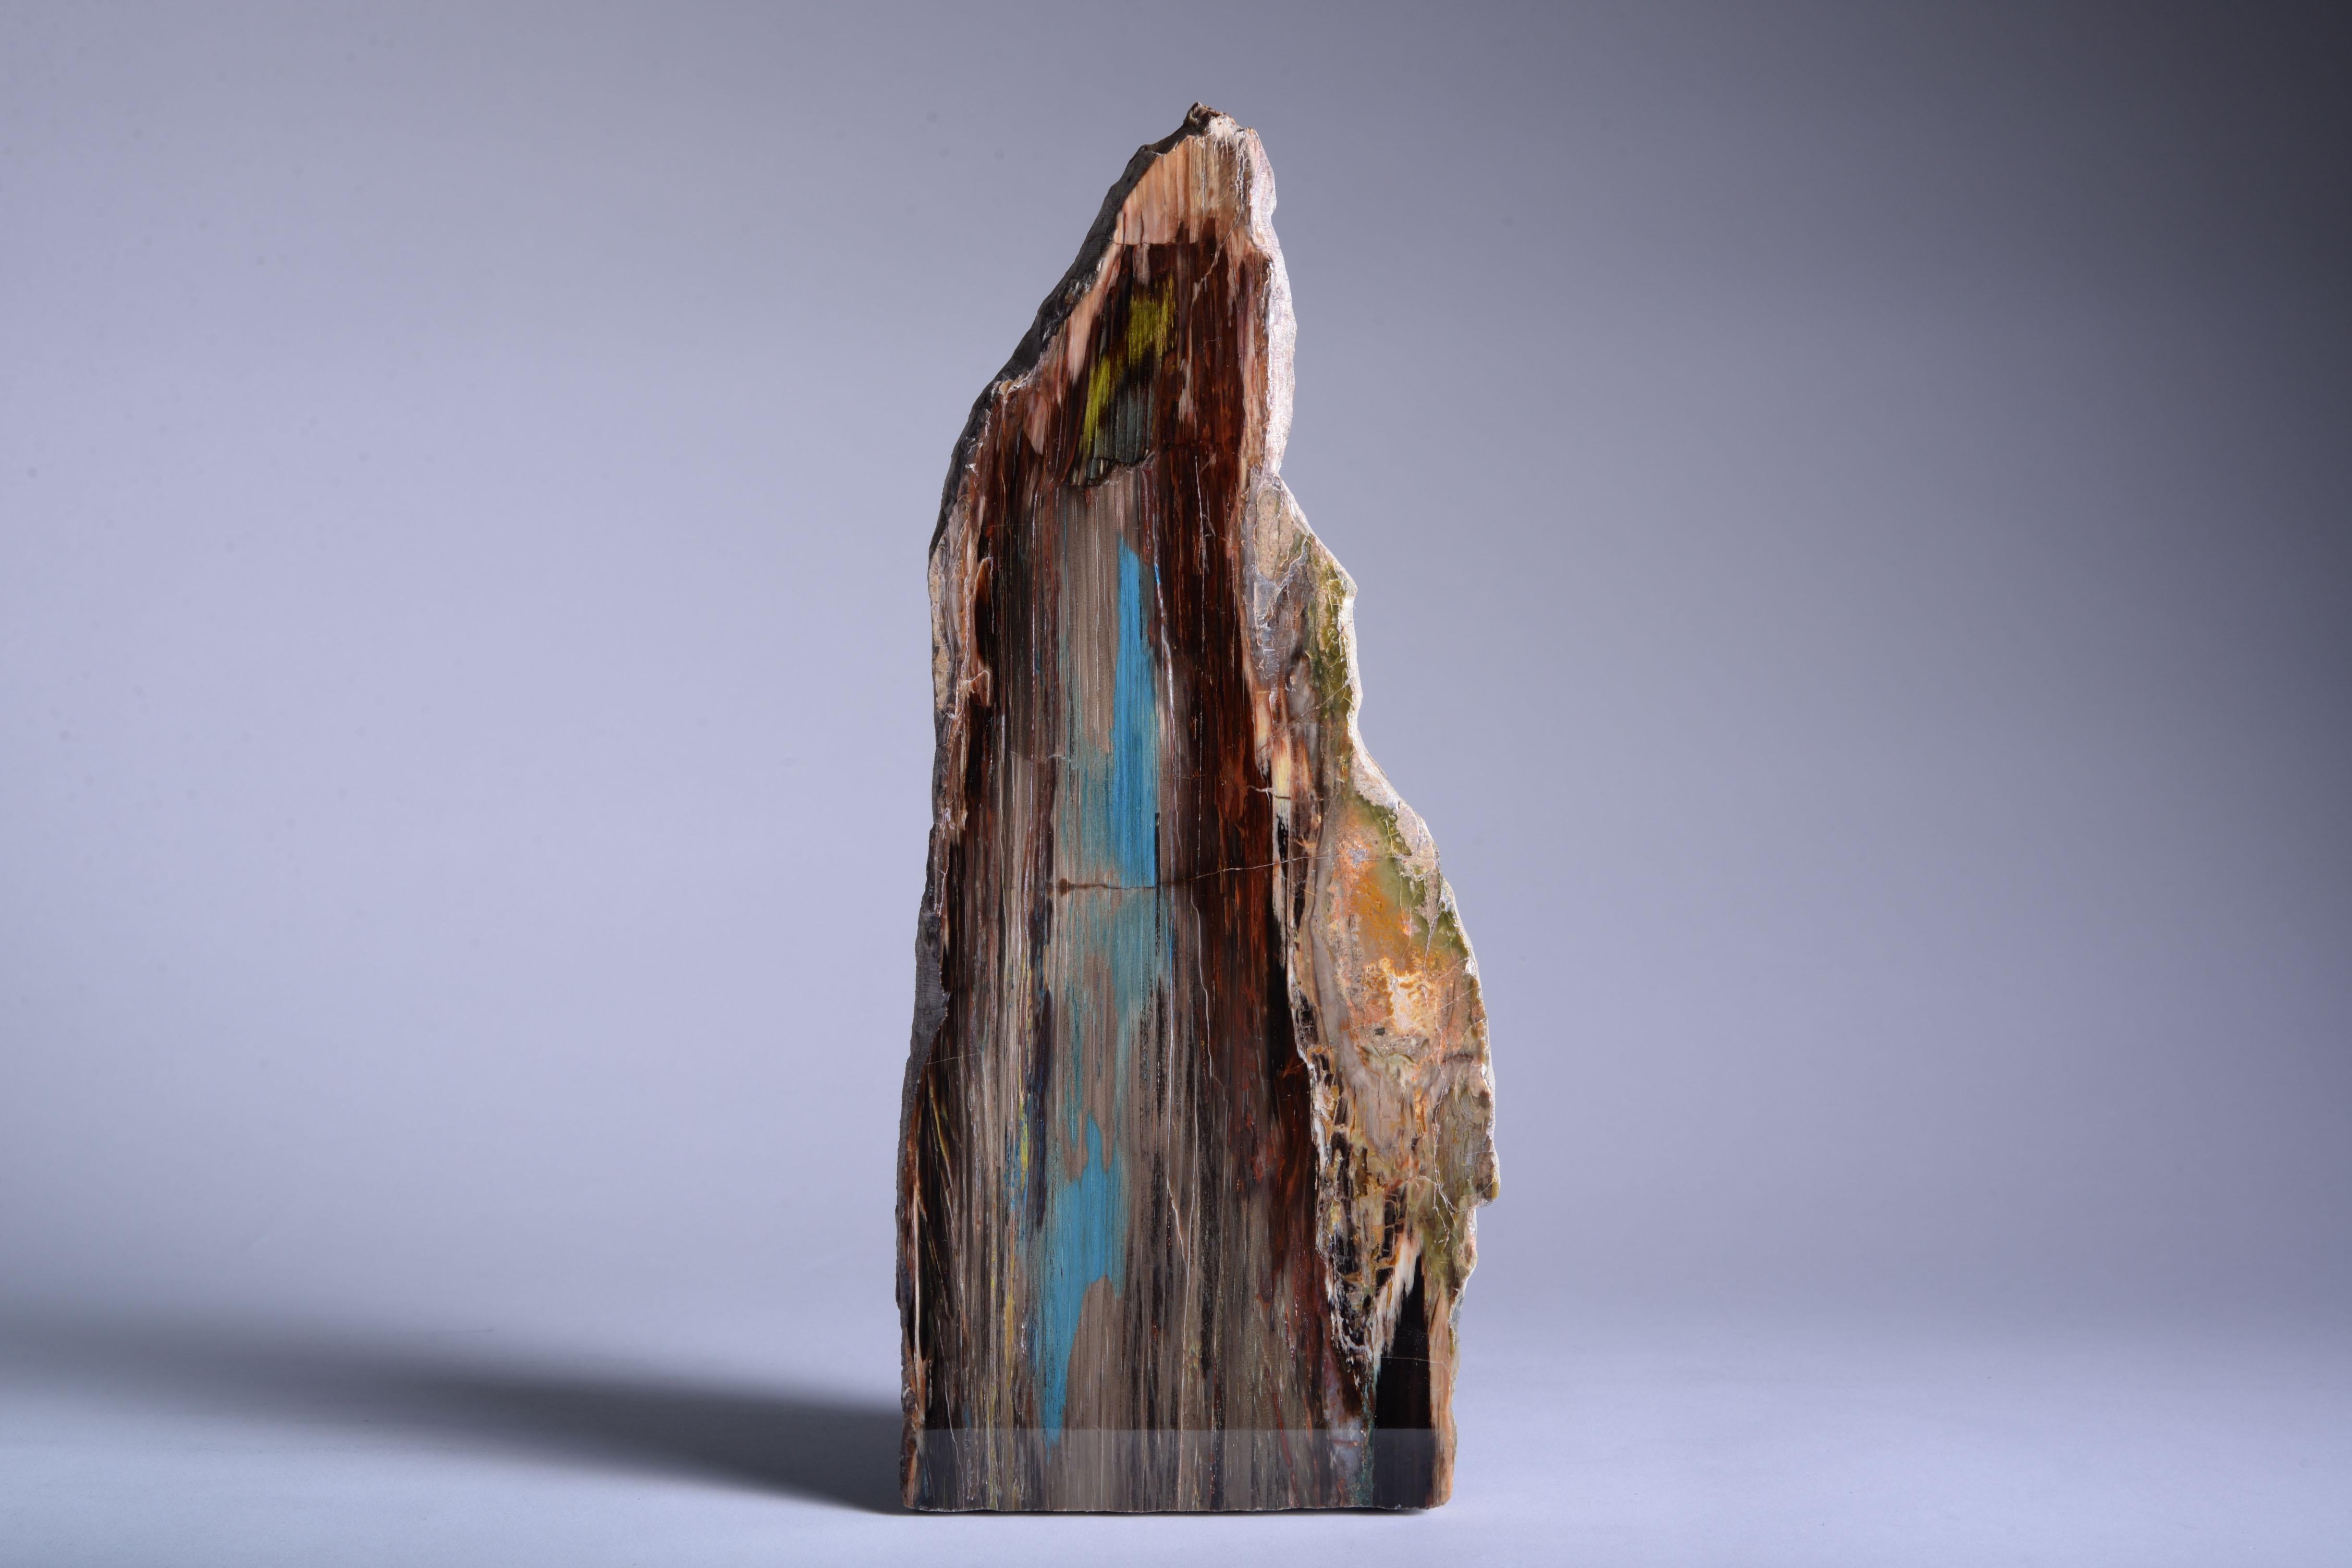 Fossilised Colla Wood Cross-Section
Miocene, circa 23-5 Million years before present
Recovered near the town of Zile, Turkey

Fossilised wood fragment displaying vibrant streaks of browns, reds, blues and yellows. This is a magnificent example of